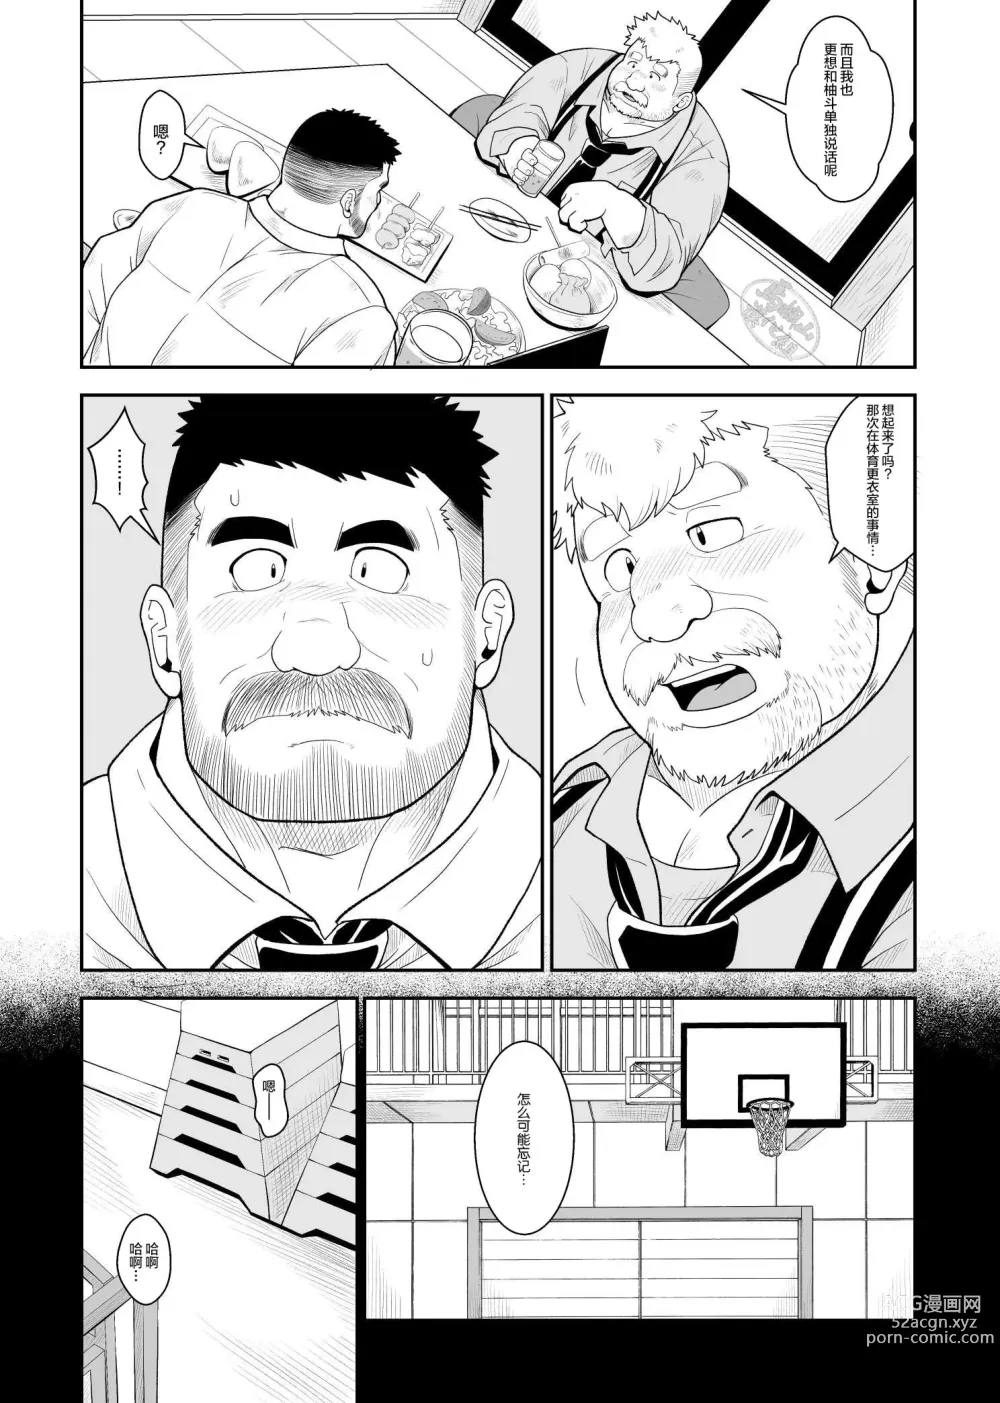 Page 8 of doujinshi 肉欲同学会